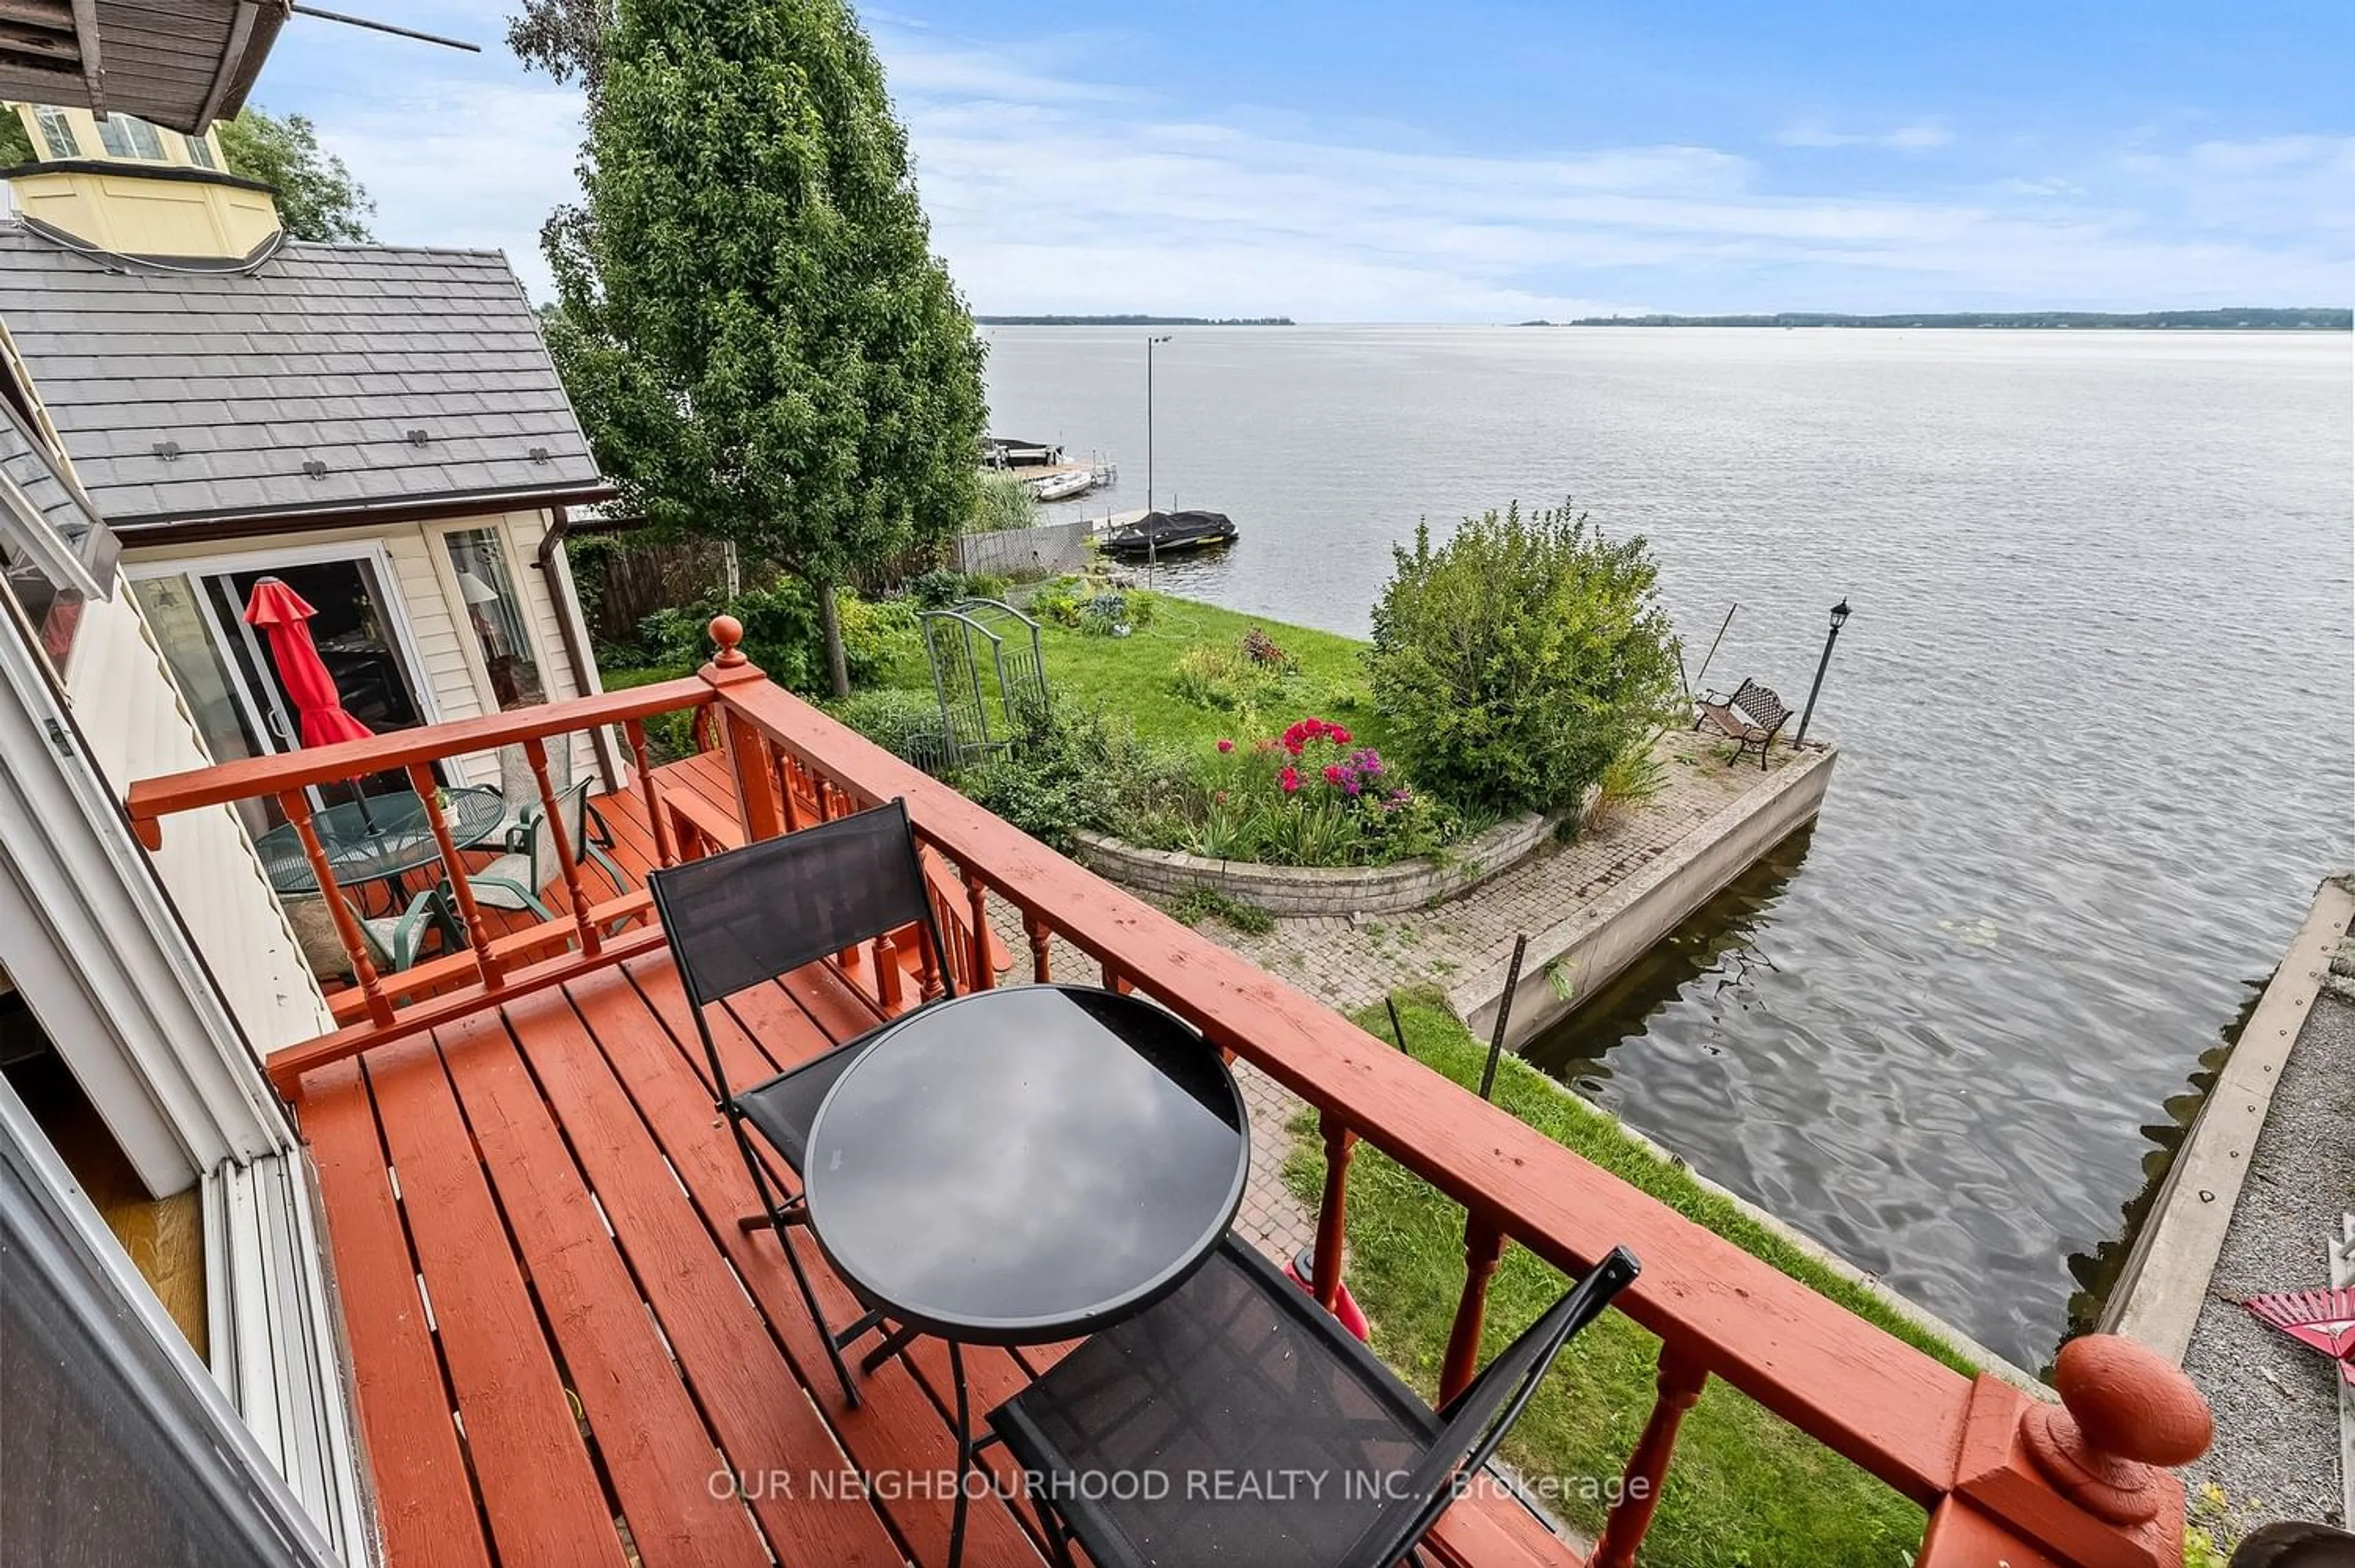 Lakeview for 127 Harbour St, Brighton Ontario K0K 1H0